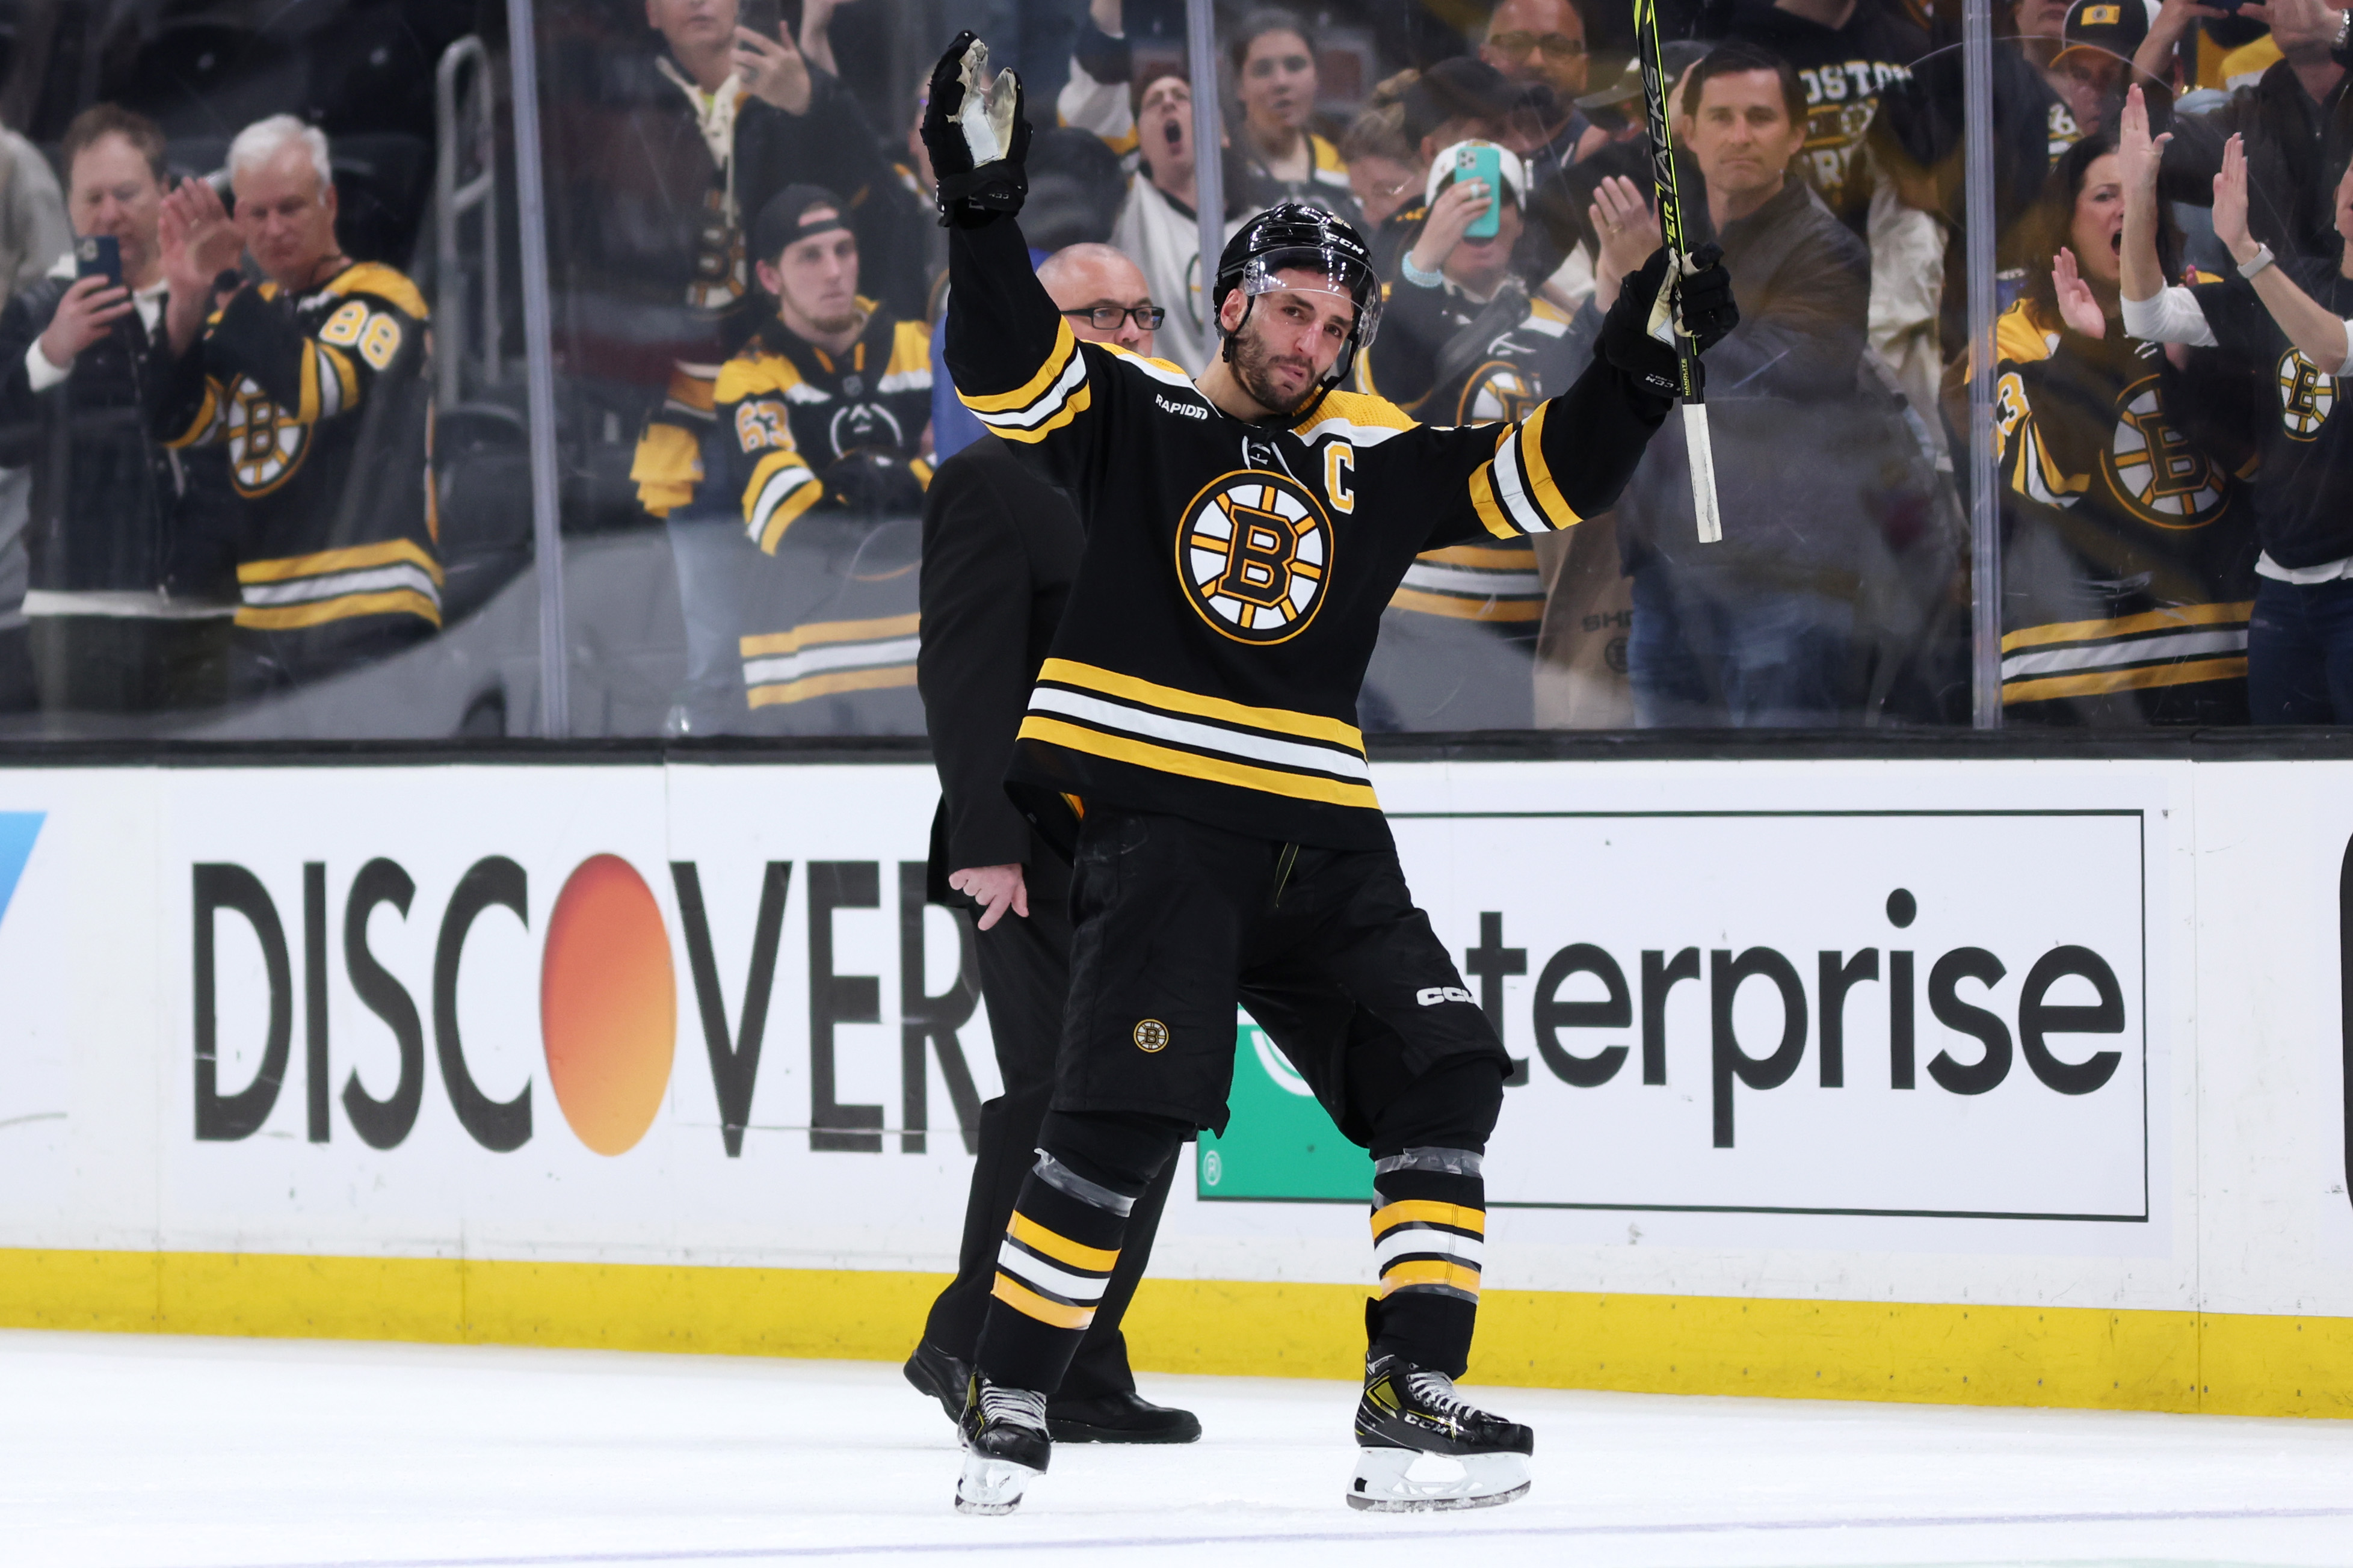 Patrice Bergeron of the Boston Bruins waves to fans before exiting the ice after Florida Panthers defeat the Bruins 4-3 in overtime of Game Seven of the First Round of the 2023 Stanley Cup Playoffs at TD Garden on April 30, 2023 in Boston, Massachusetts.